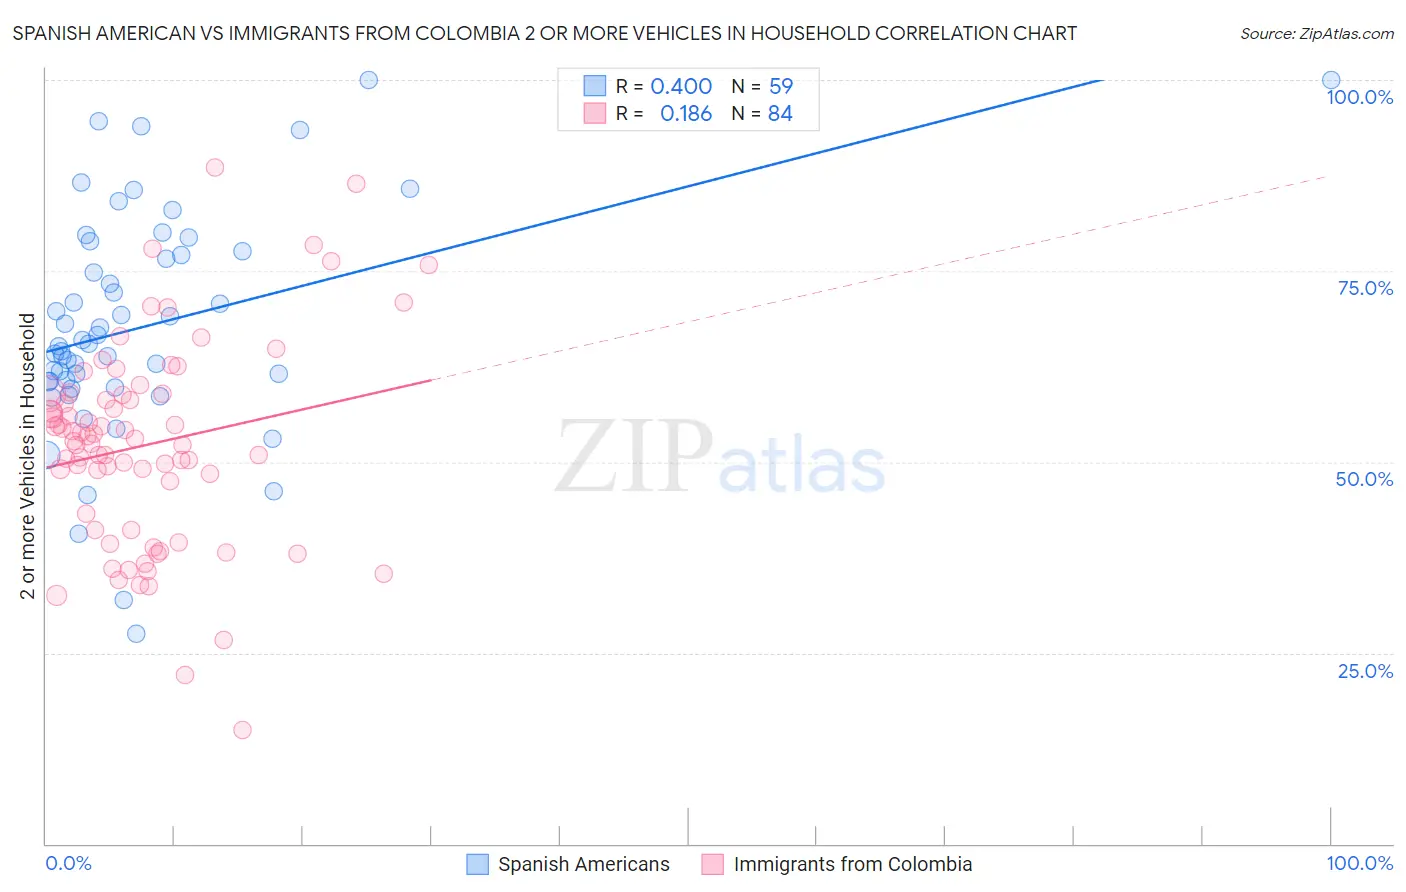 Spanish American vs Immigrants from Colombia 2 or more Vehicles in Household